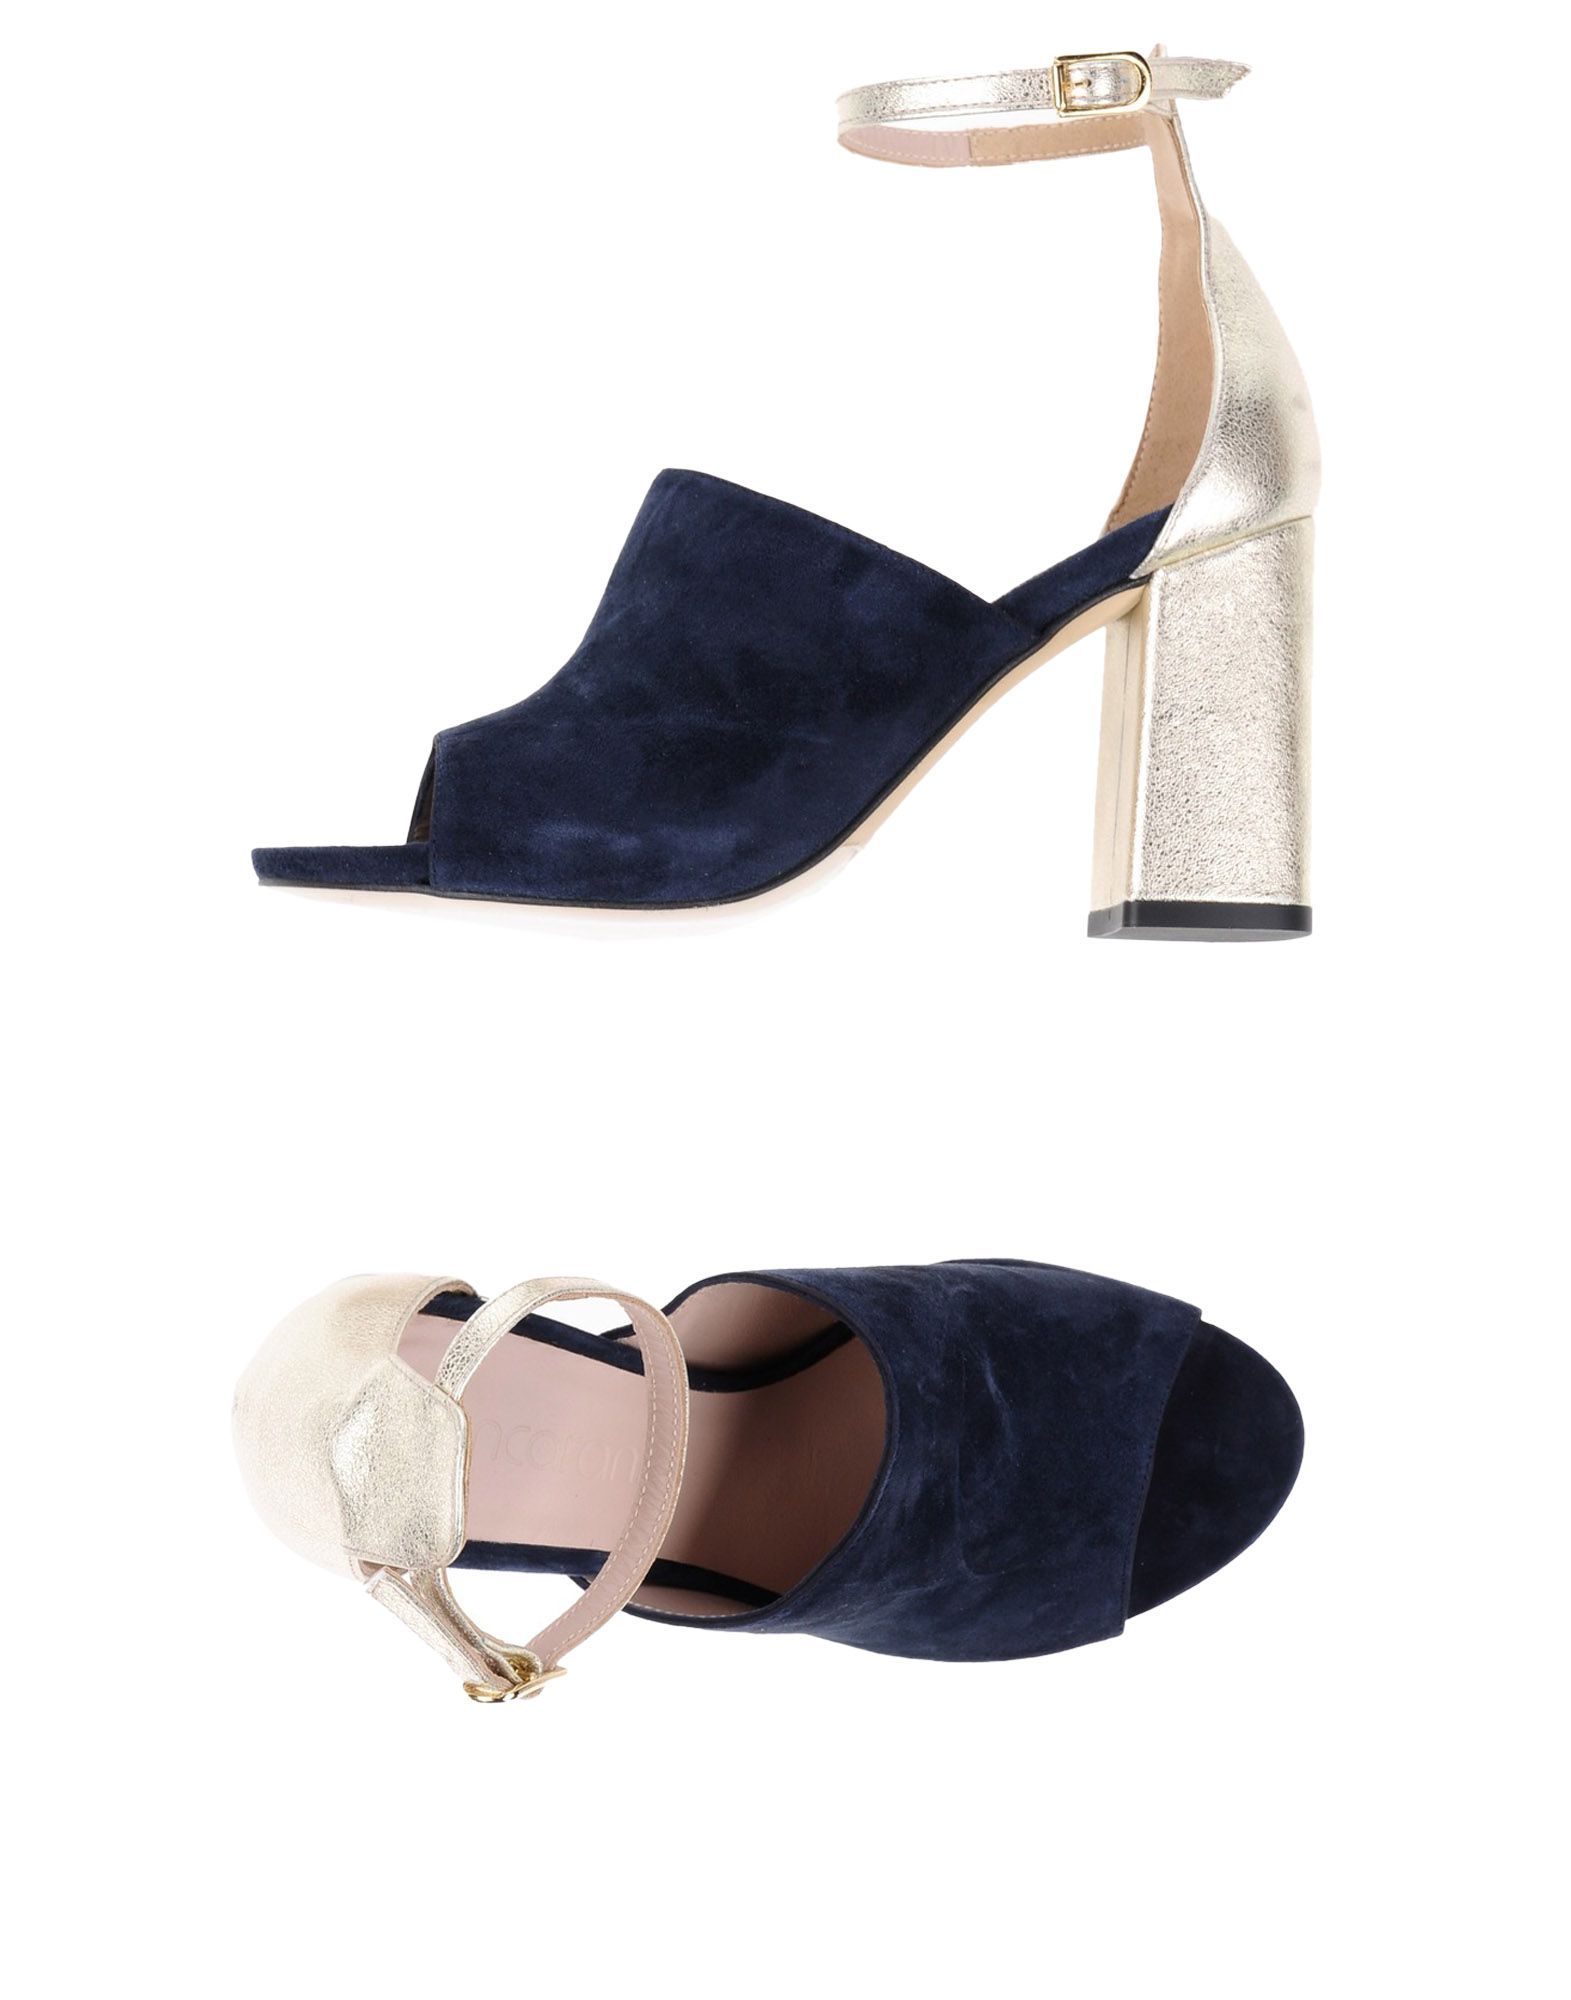 Suede effect<br>No appliqu�s<br>Two-tone<br>Buckling ankle strap closure<br>Round toeline<br>Square heel<br>Leather lining<br>Rubber sole<br>Contains non-textile parts of animal origin<br>